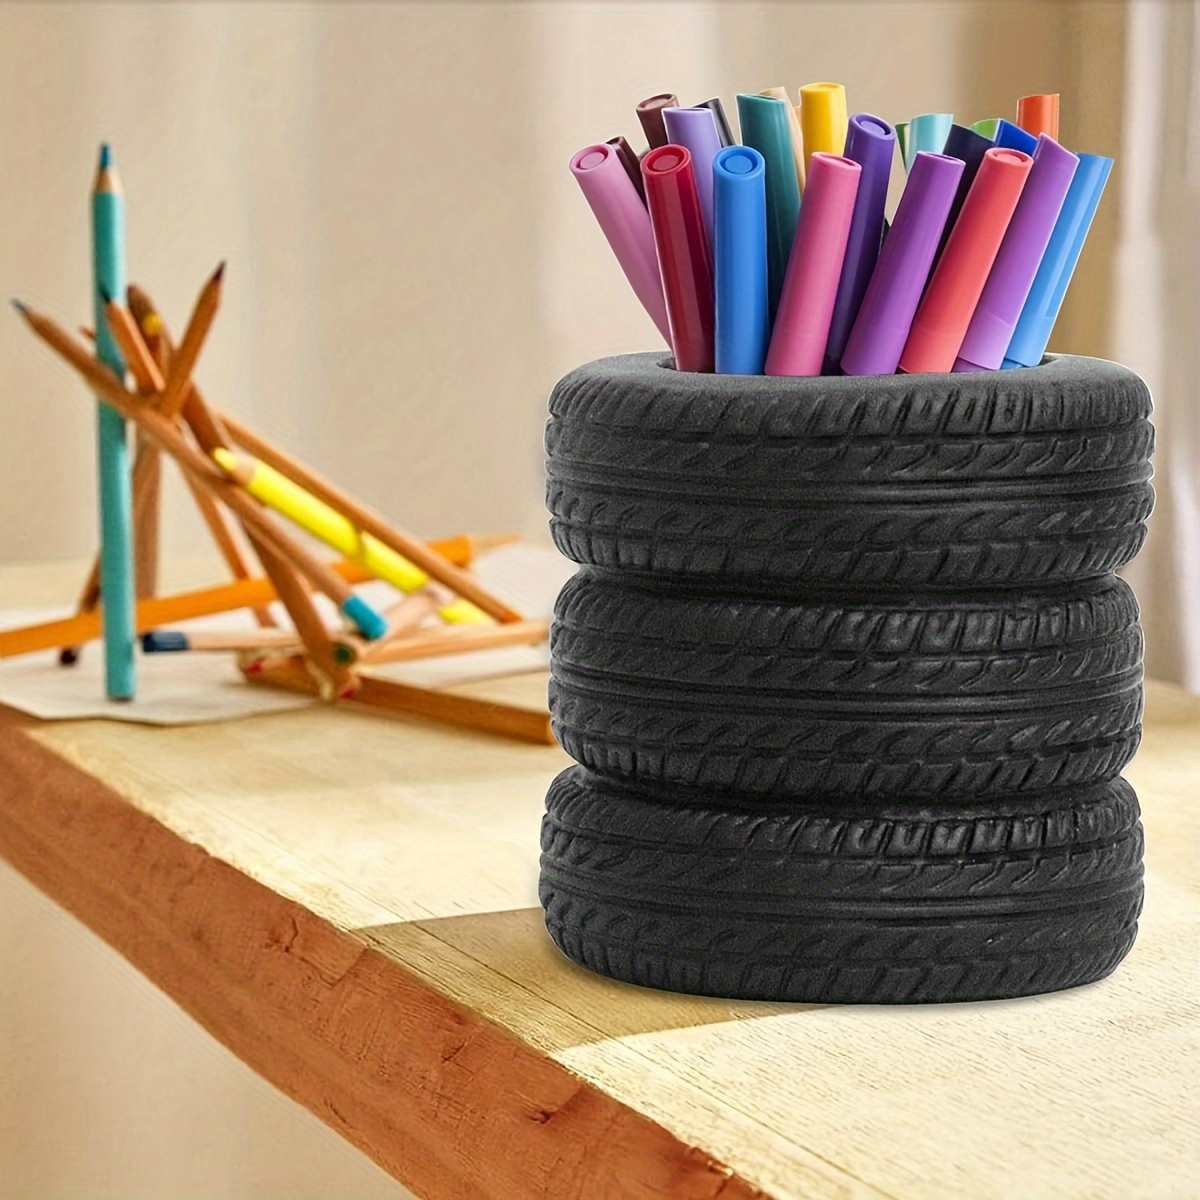 

Unique Car Tire-shaped Pen Holder - Perfect For Desk Organization, Students & Gifts